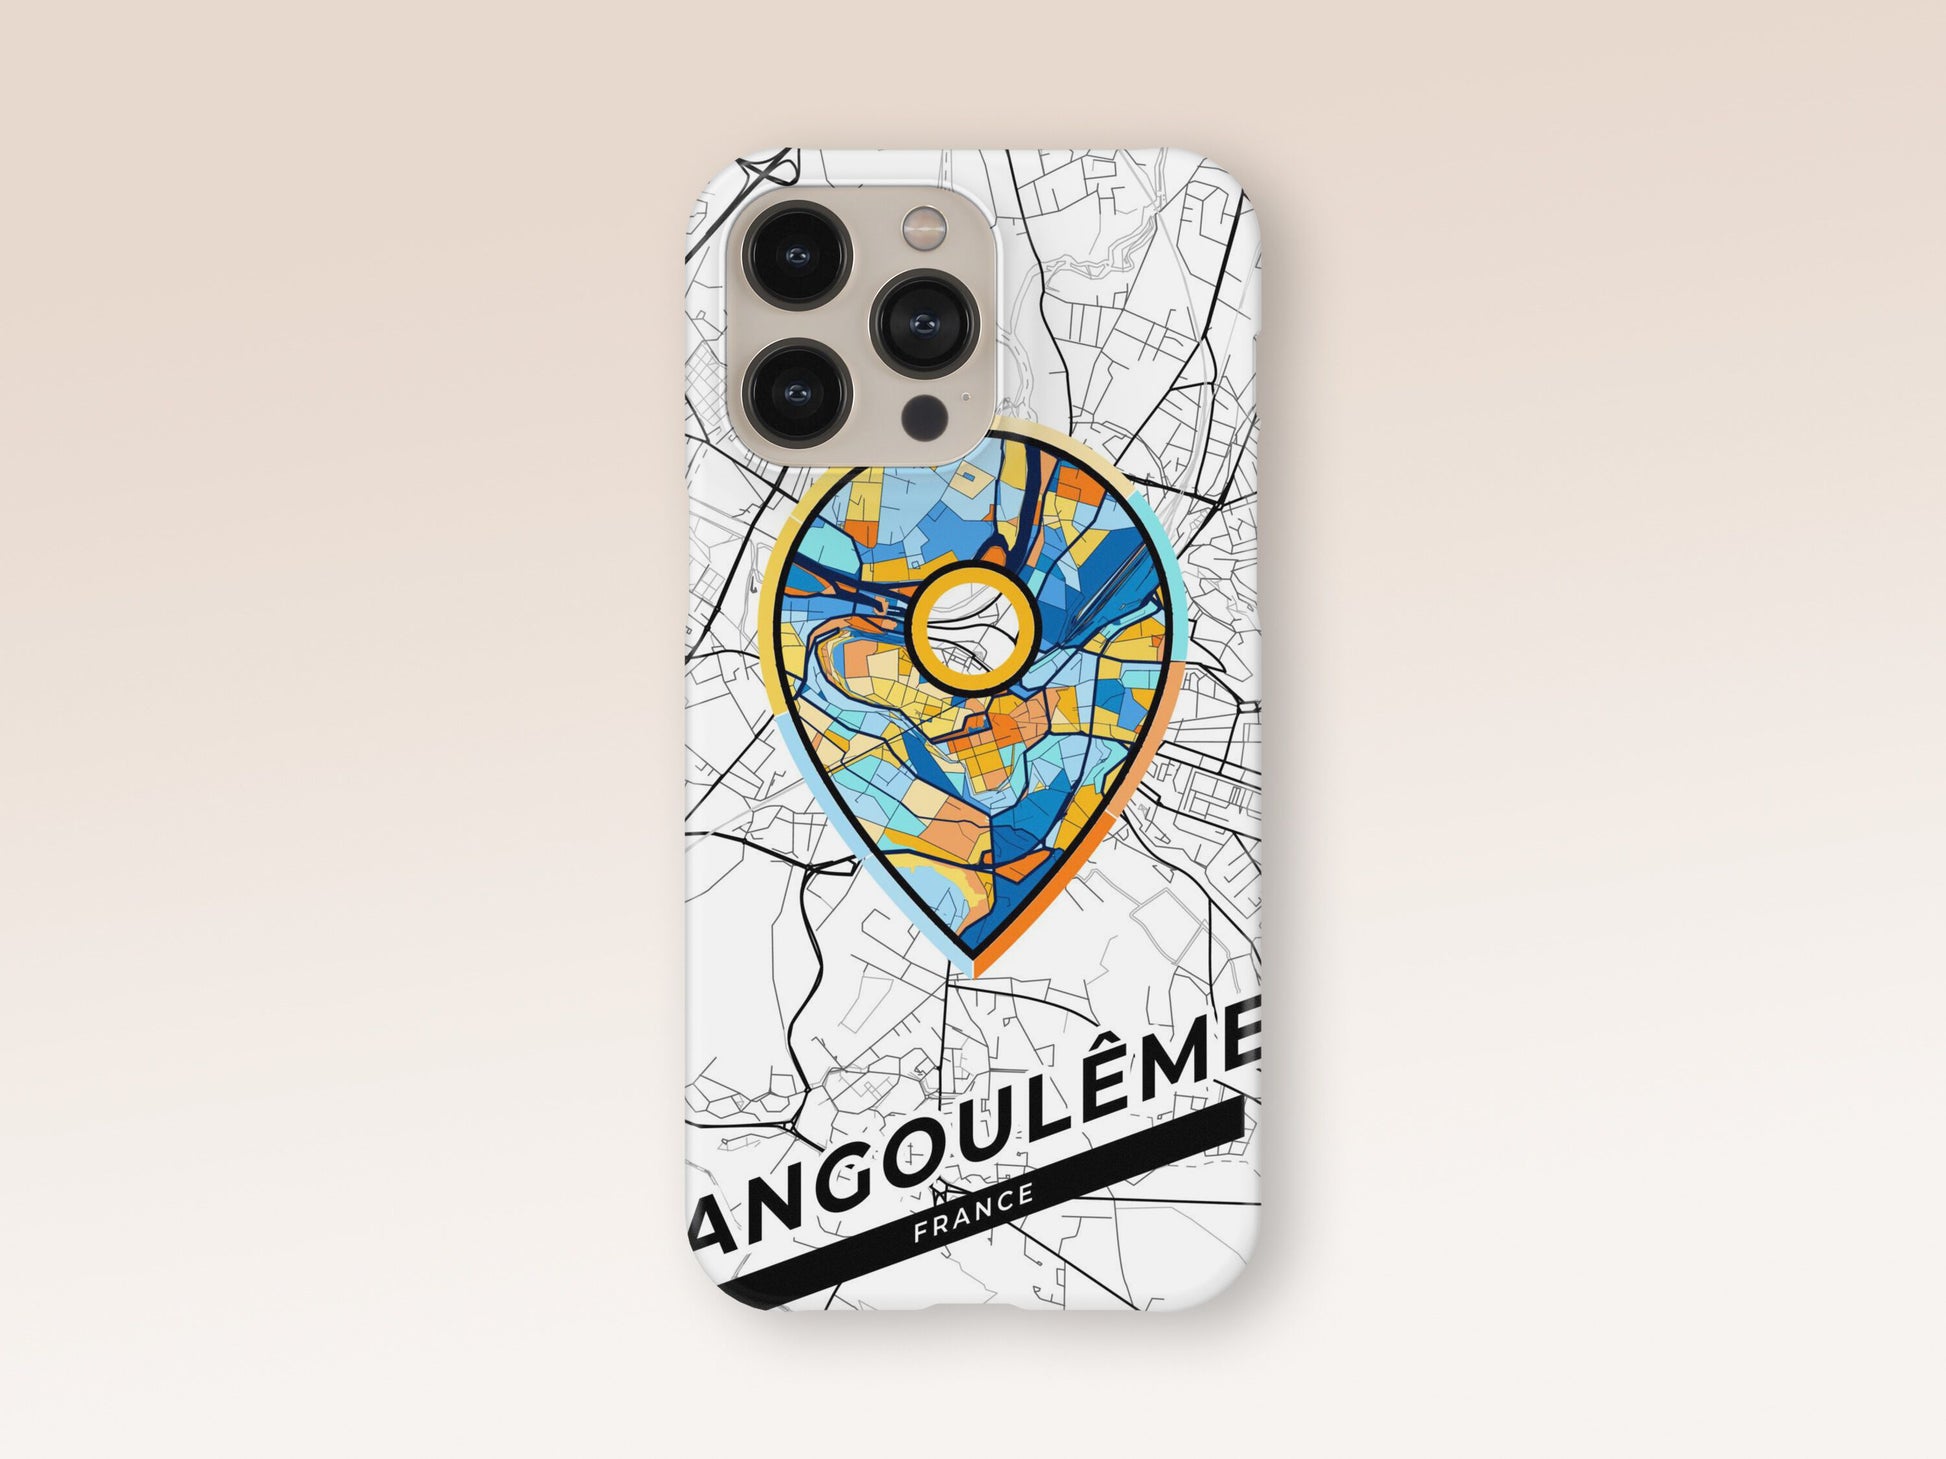 Angoulême France slim phone case with colorful icon. Birthday, wedding or housewarming gift. Couple match cases. 1